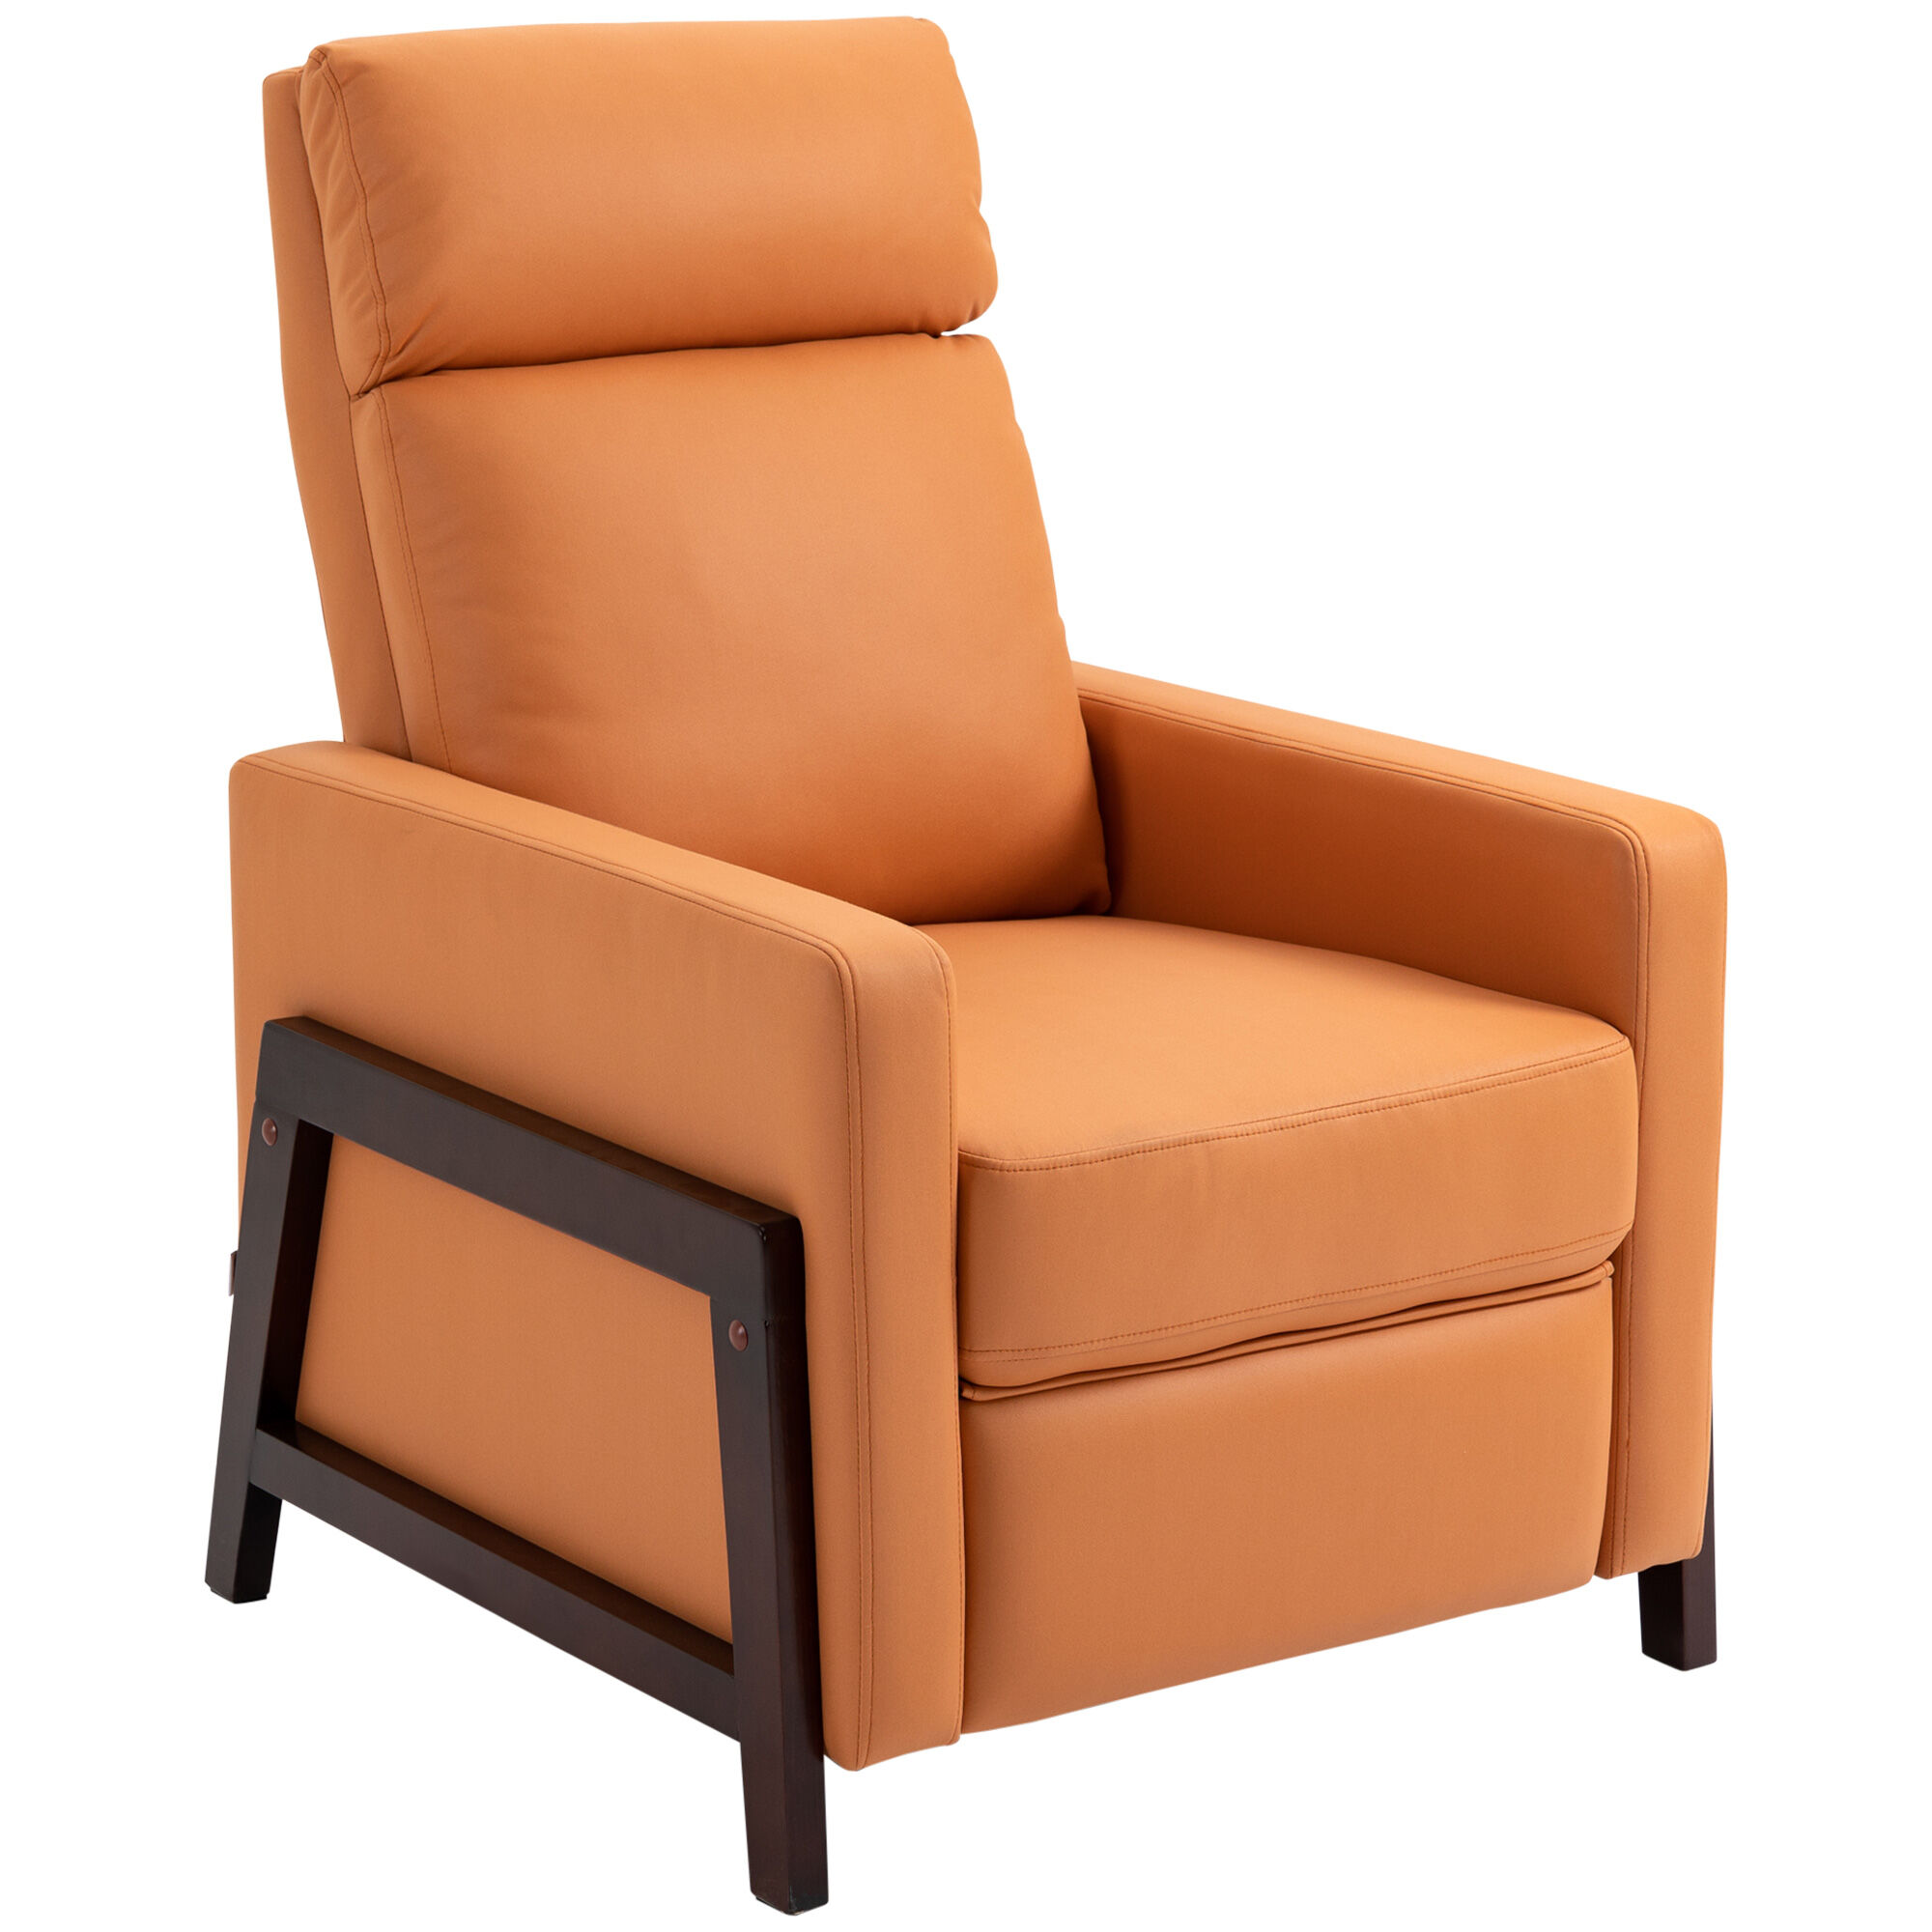 HOMCOM Manual Recliner Chair for Living Room Bedroom, Reclining Sofa Armchair with Footrest, Orange